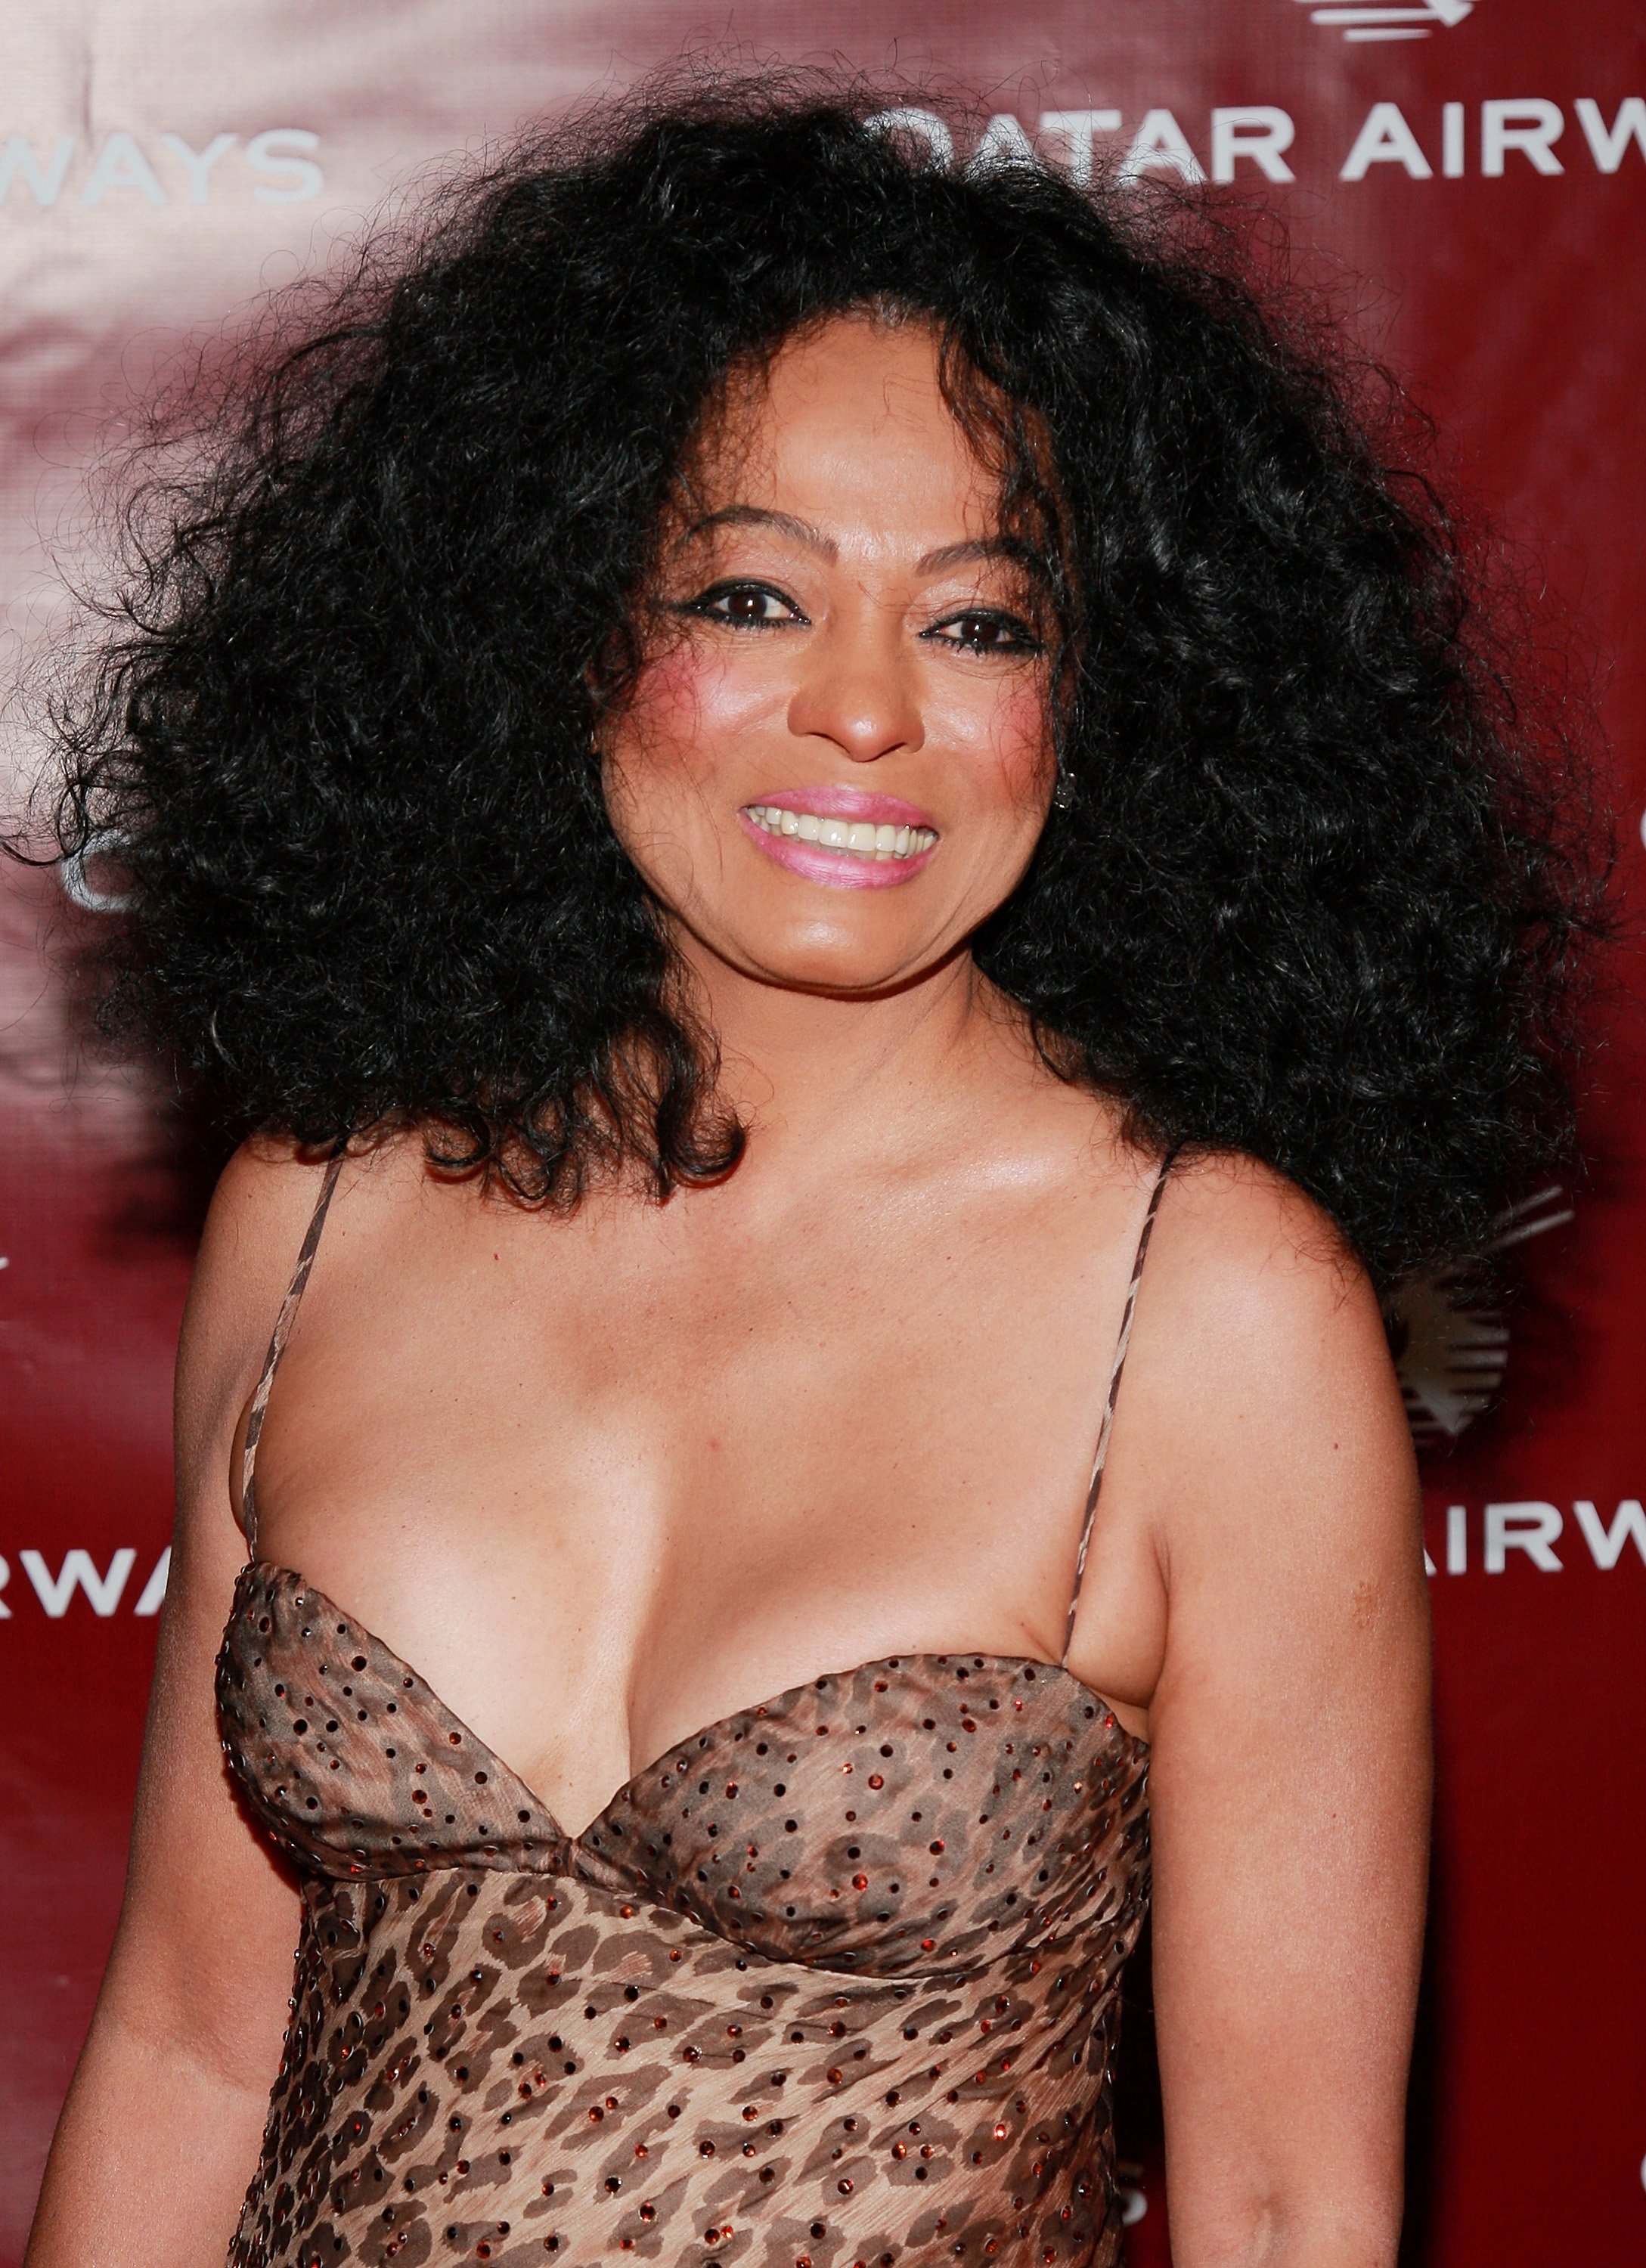 Diana Ross attends a Qatar Airways gala to celebrate their inaugural flights to NYC, on June 28, 2007, at the Frederick P. Rose Hall - Jazz at Lincoln Center in New York City. | Source: Getty Images